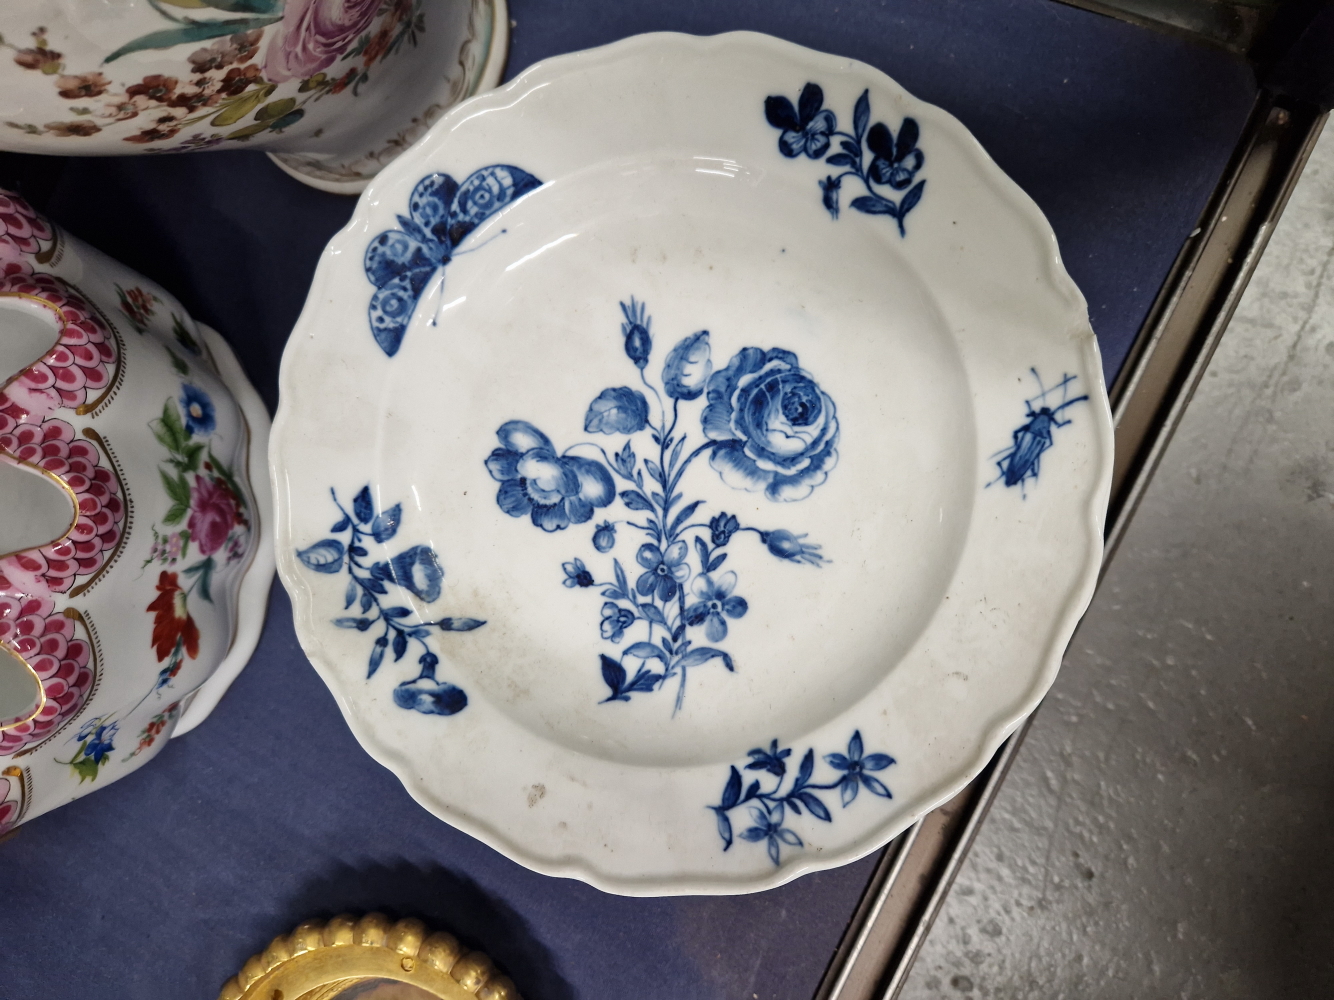 A SET OF SIX BLUE AND WHITE FLORAL PLATES, CROSSED SWORDS MARKS, TWO ENGLISH SOUP PLATES, A - Image 3 of 6